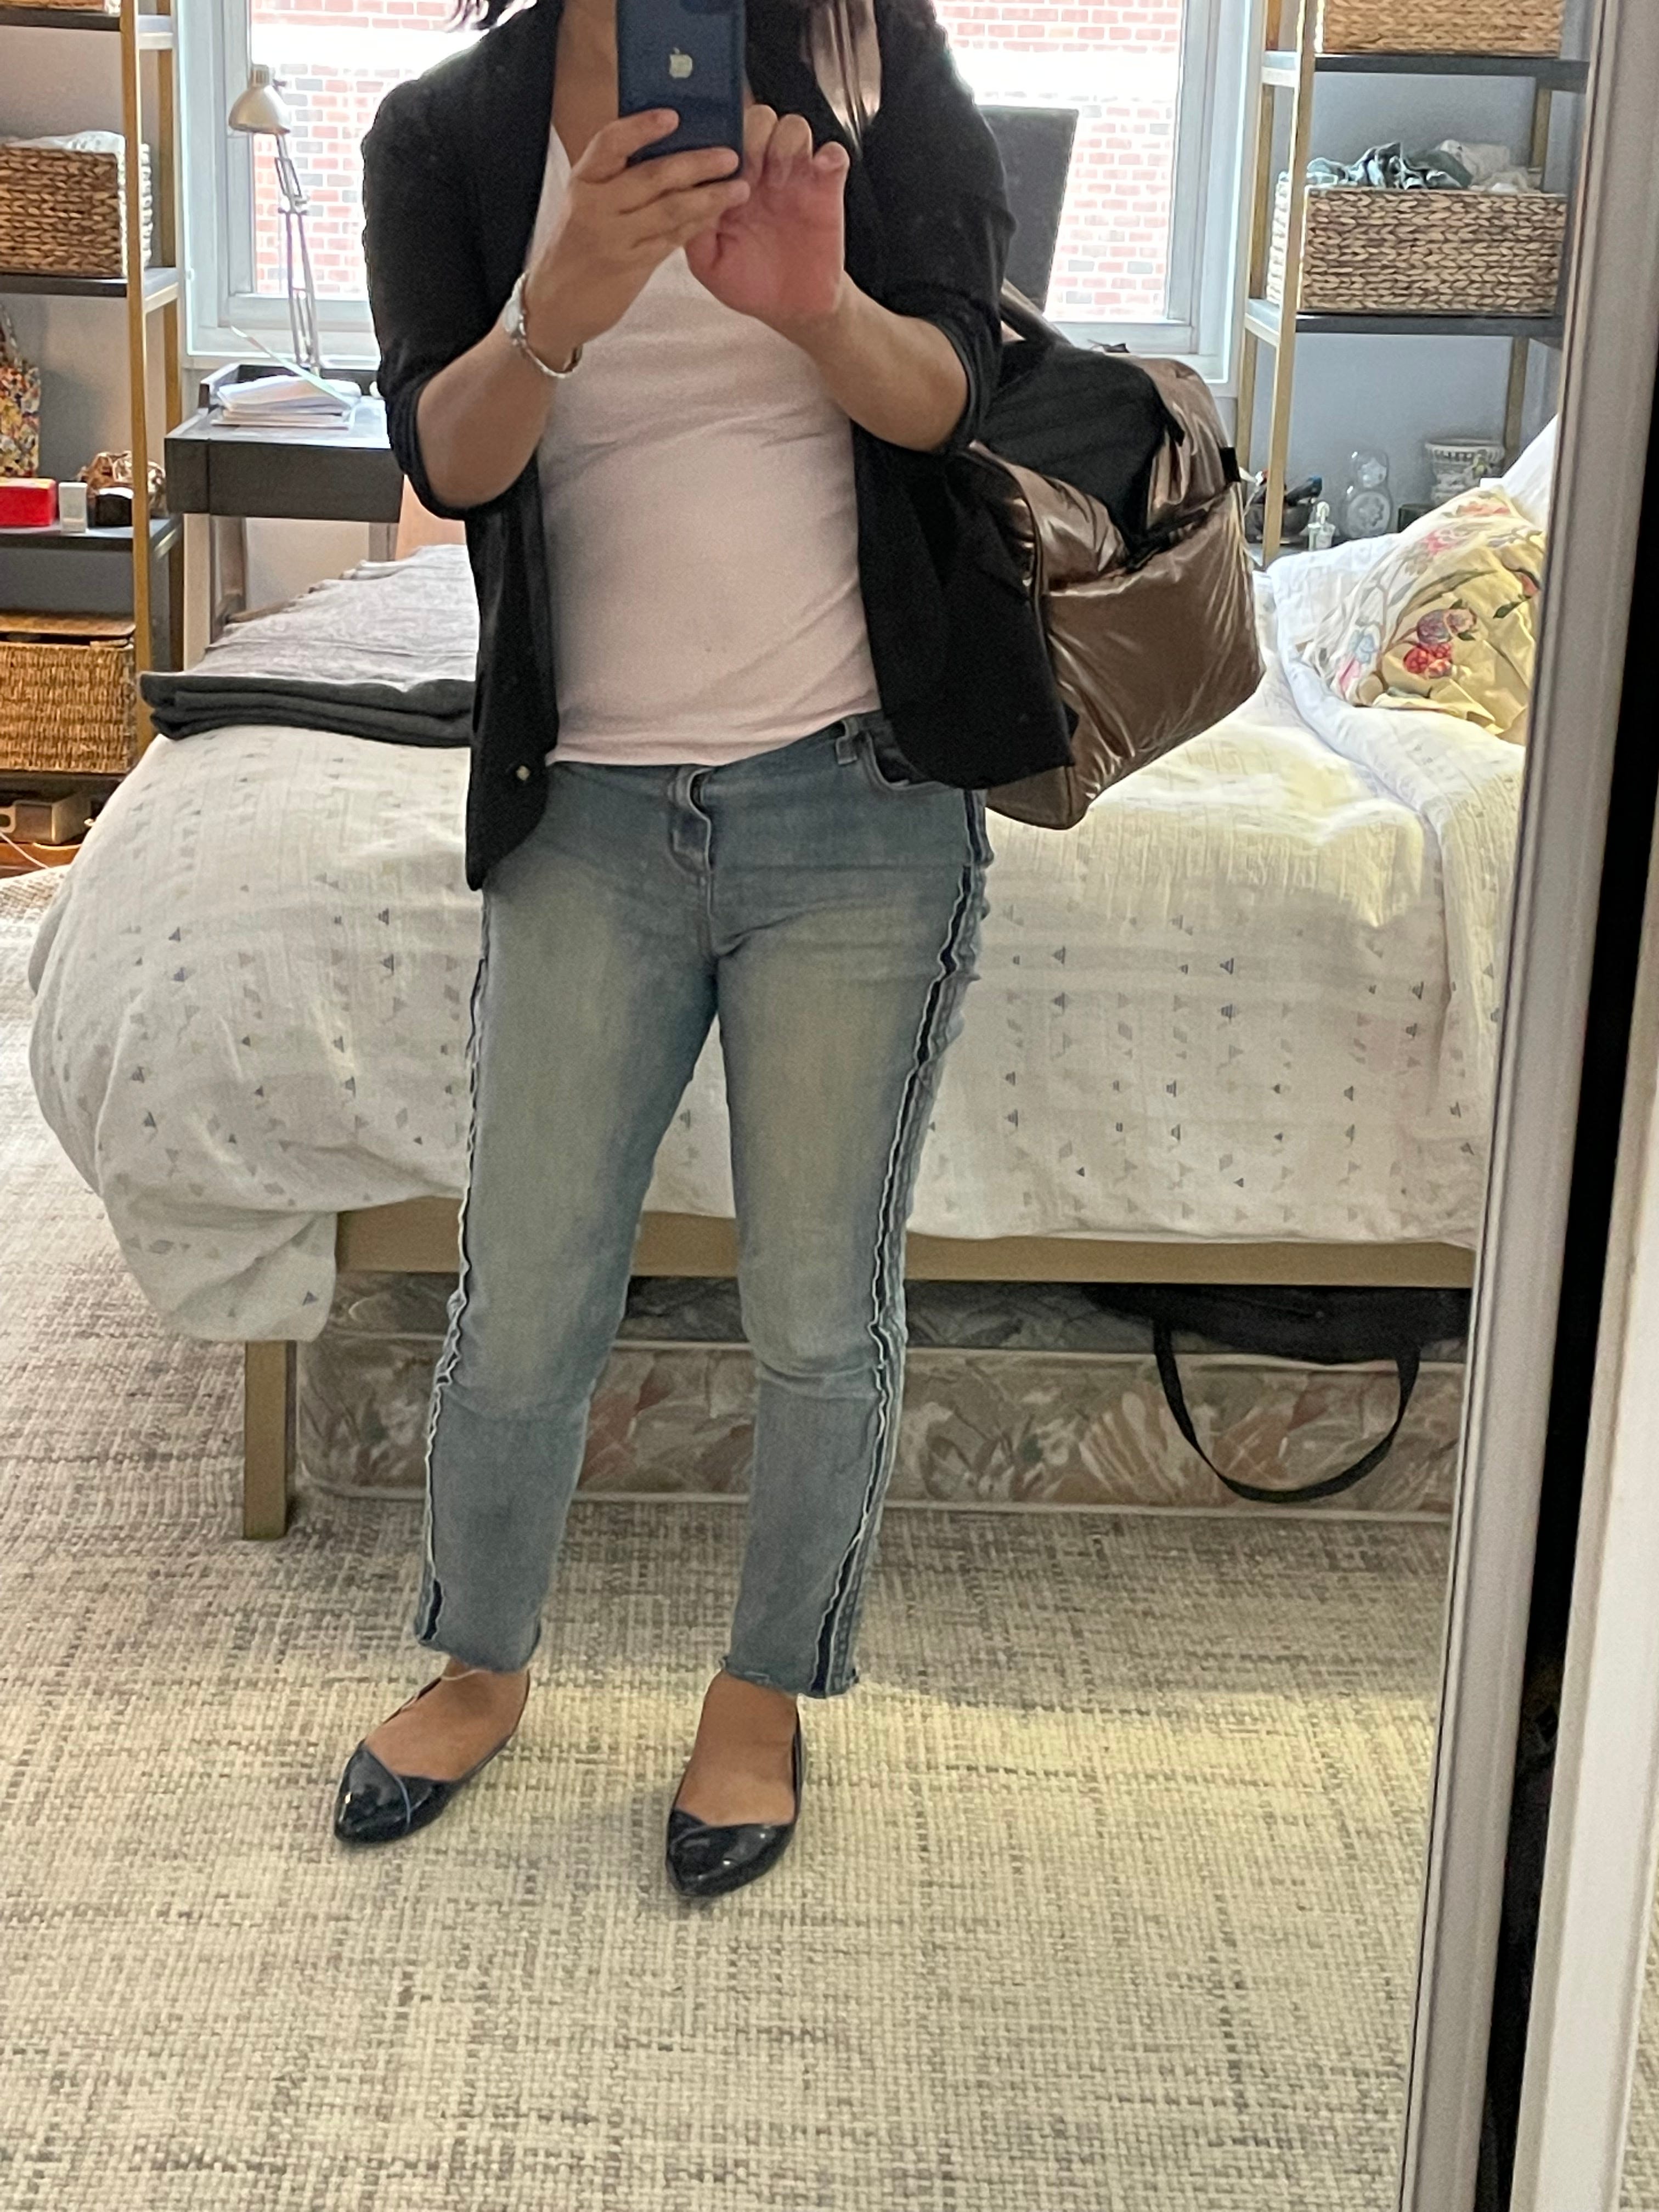 AM boss flaunts travel bags that cost more than the flight?